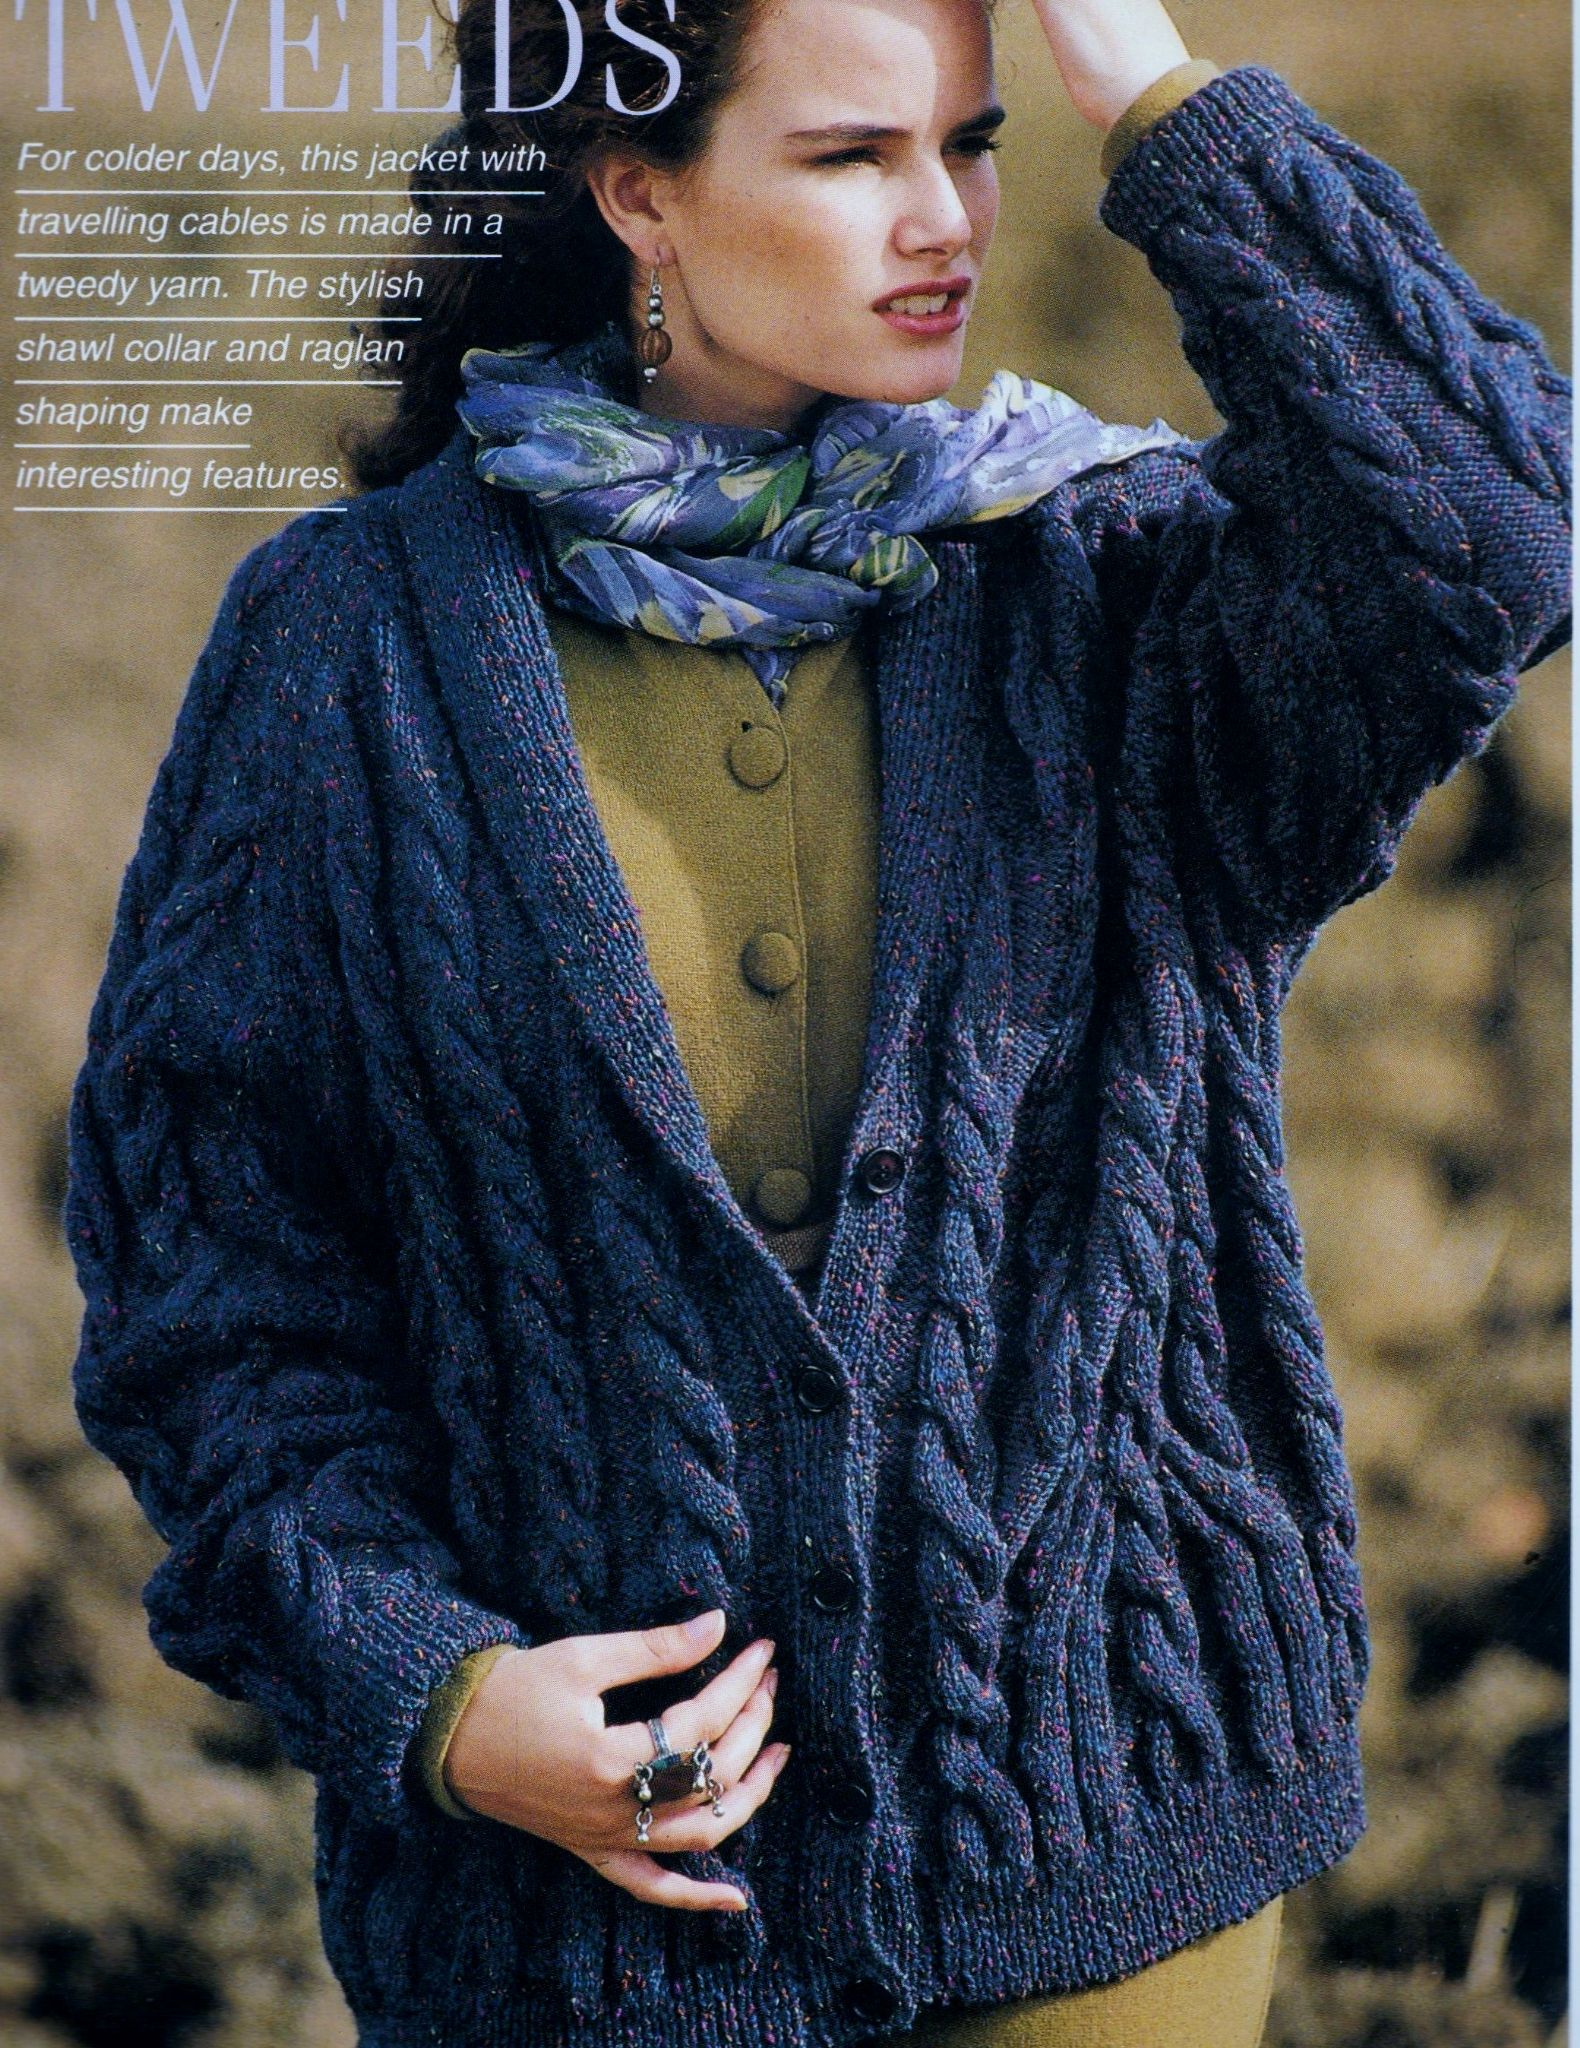 Knitted Jacket Patterns Pdf Digital Download Vintage Knitting Pattern To Make A Ladies Loose Fitting Travelling Cable Cardigan Jacket With Shawl Collar In Dk